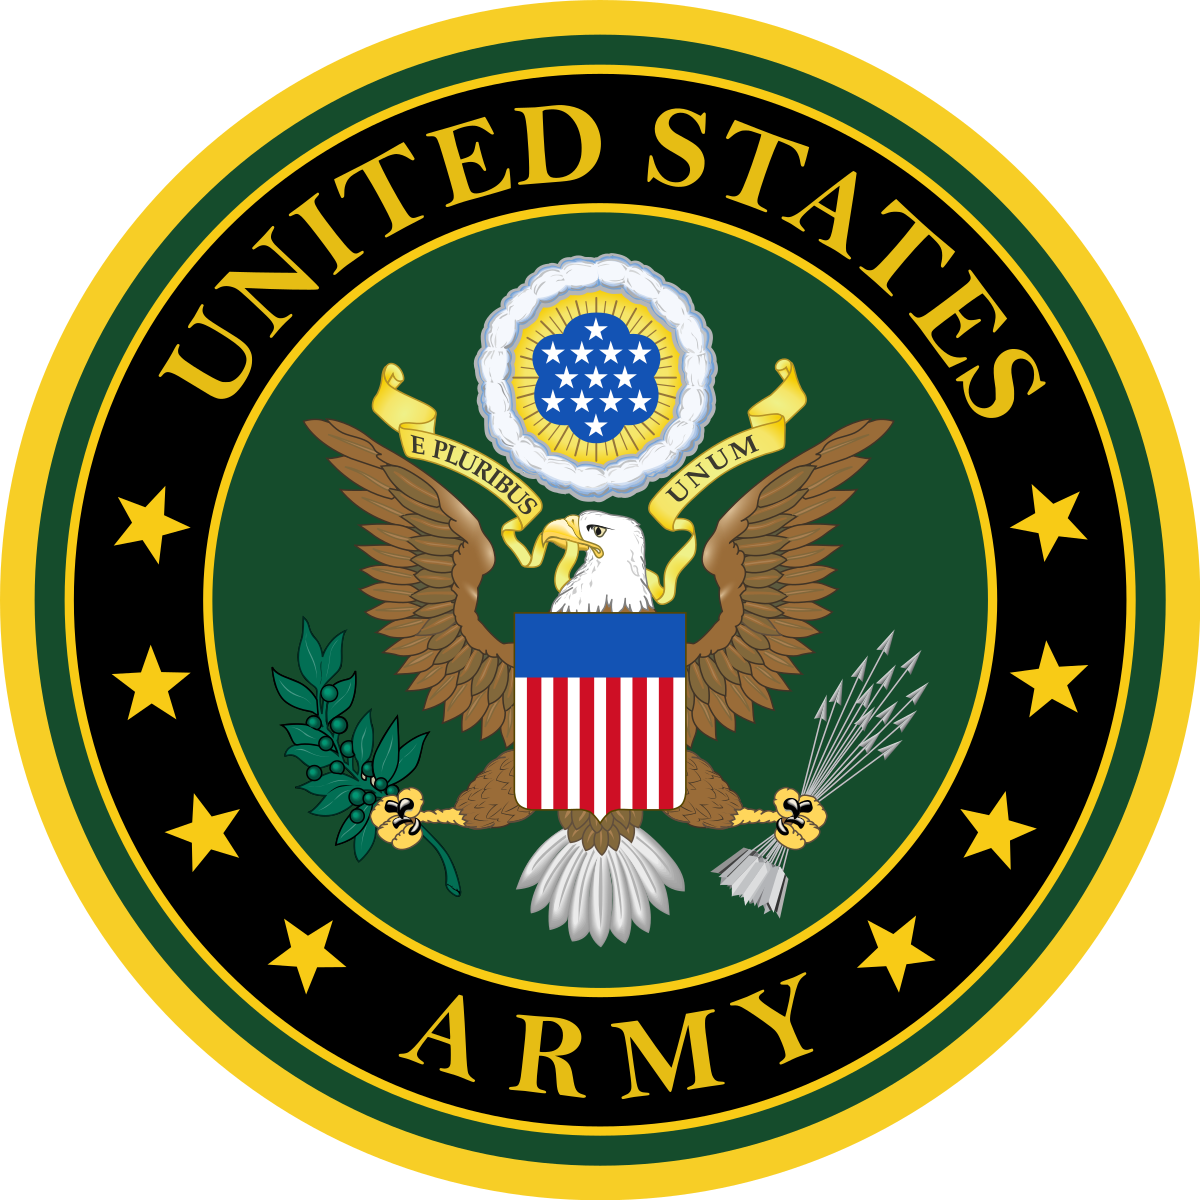 Mark_of_the_United_States_Army.svg.png